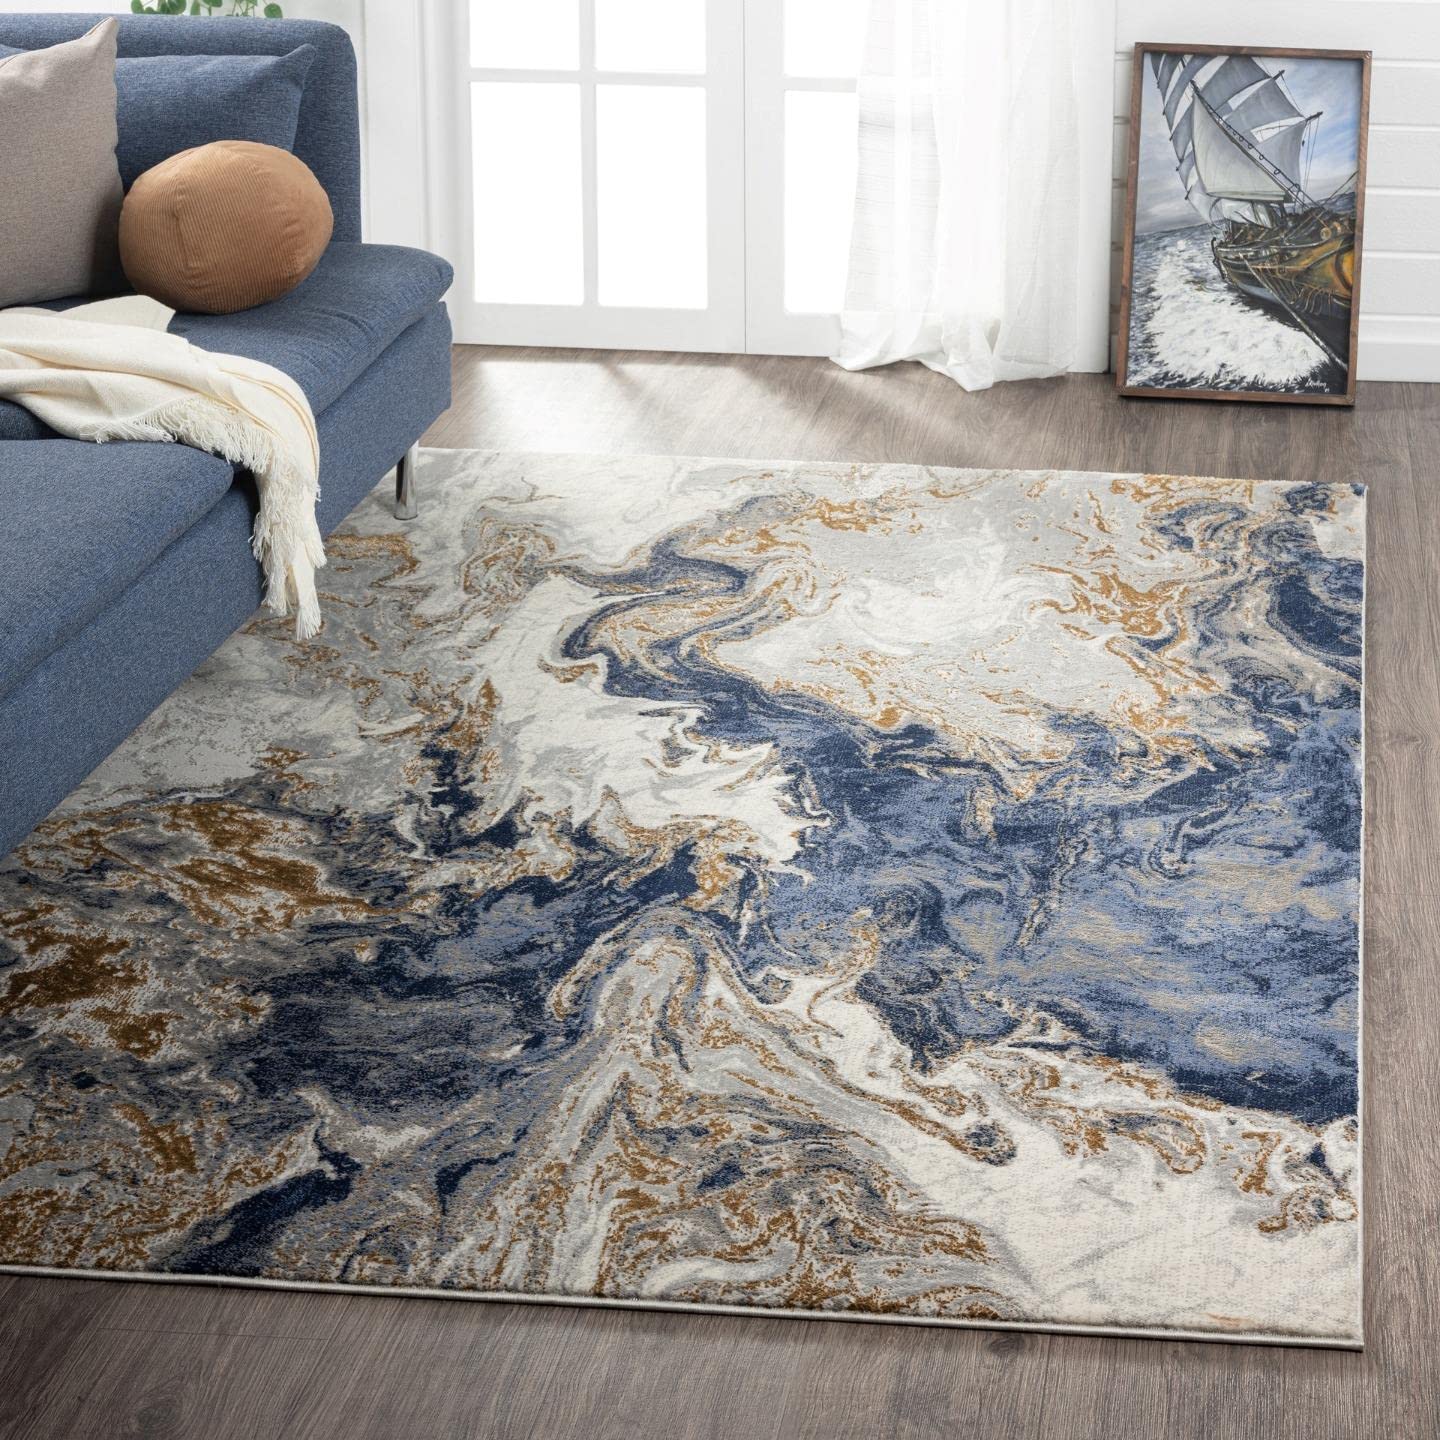 LUXE WEAVERS Marble collection Blue Area Rug 2x3 Modern Abstract Swirl Design Non-Shedding carpet